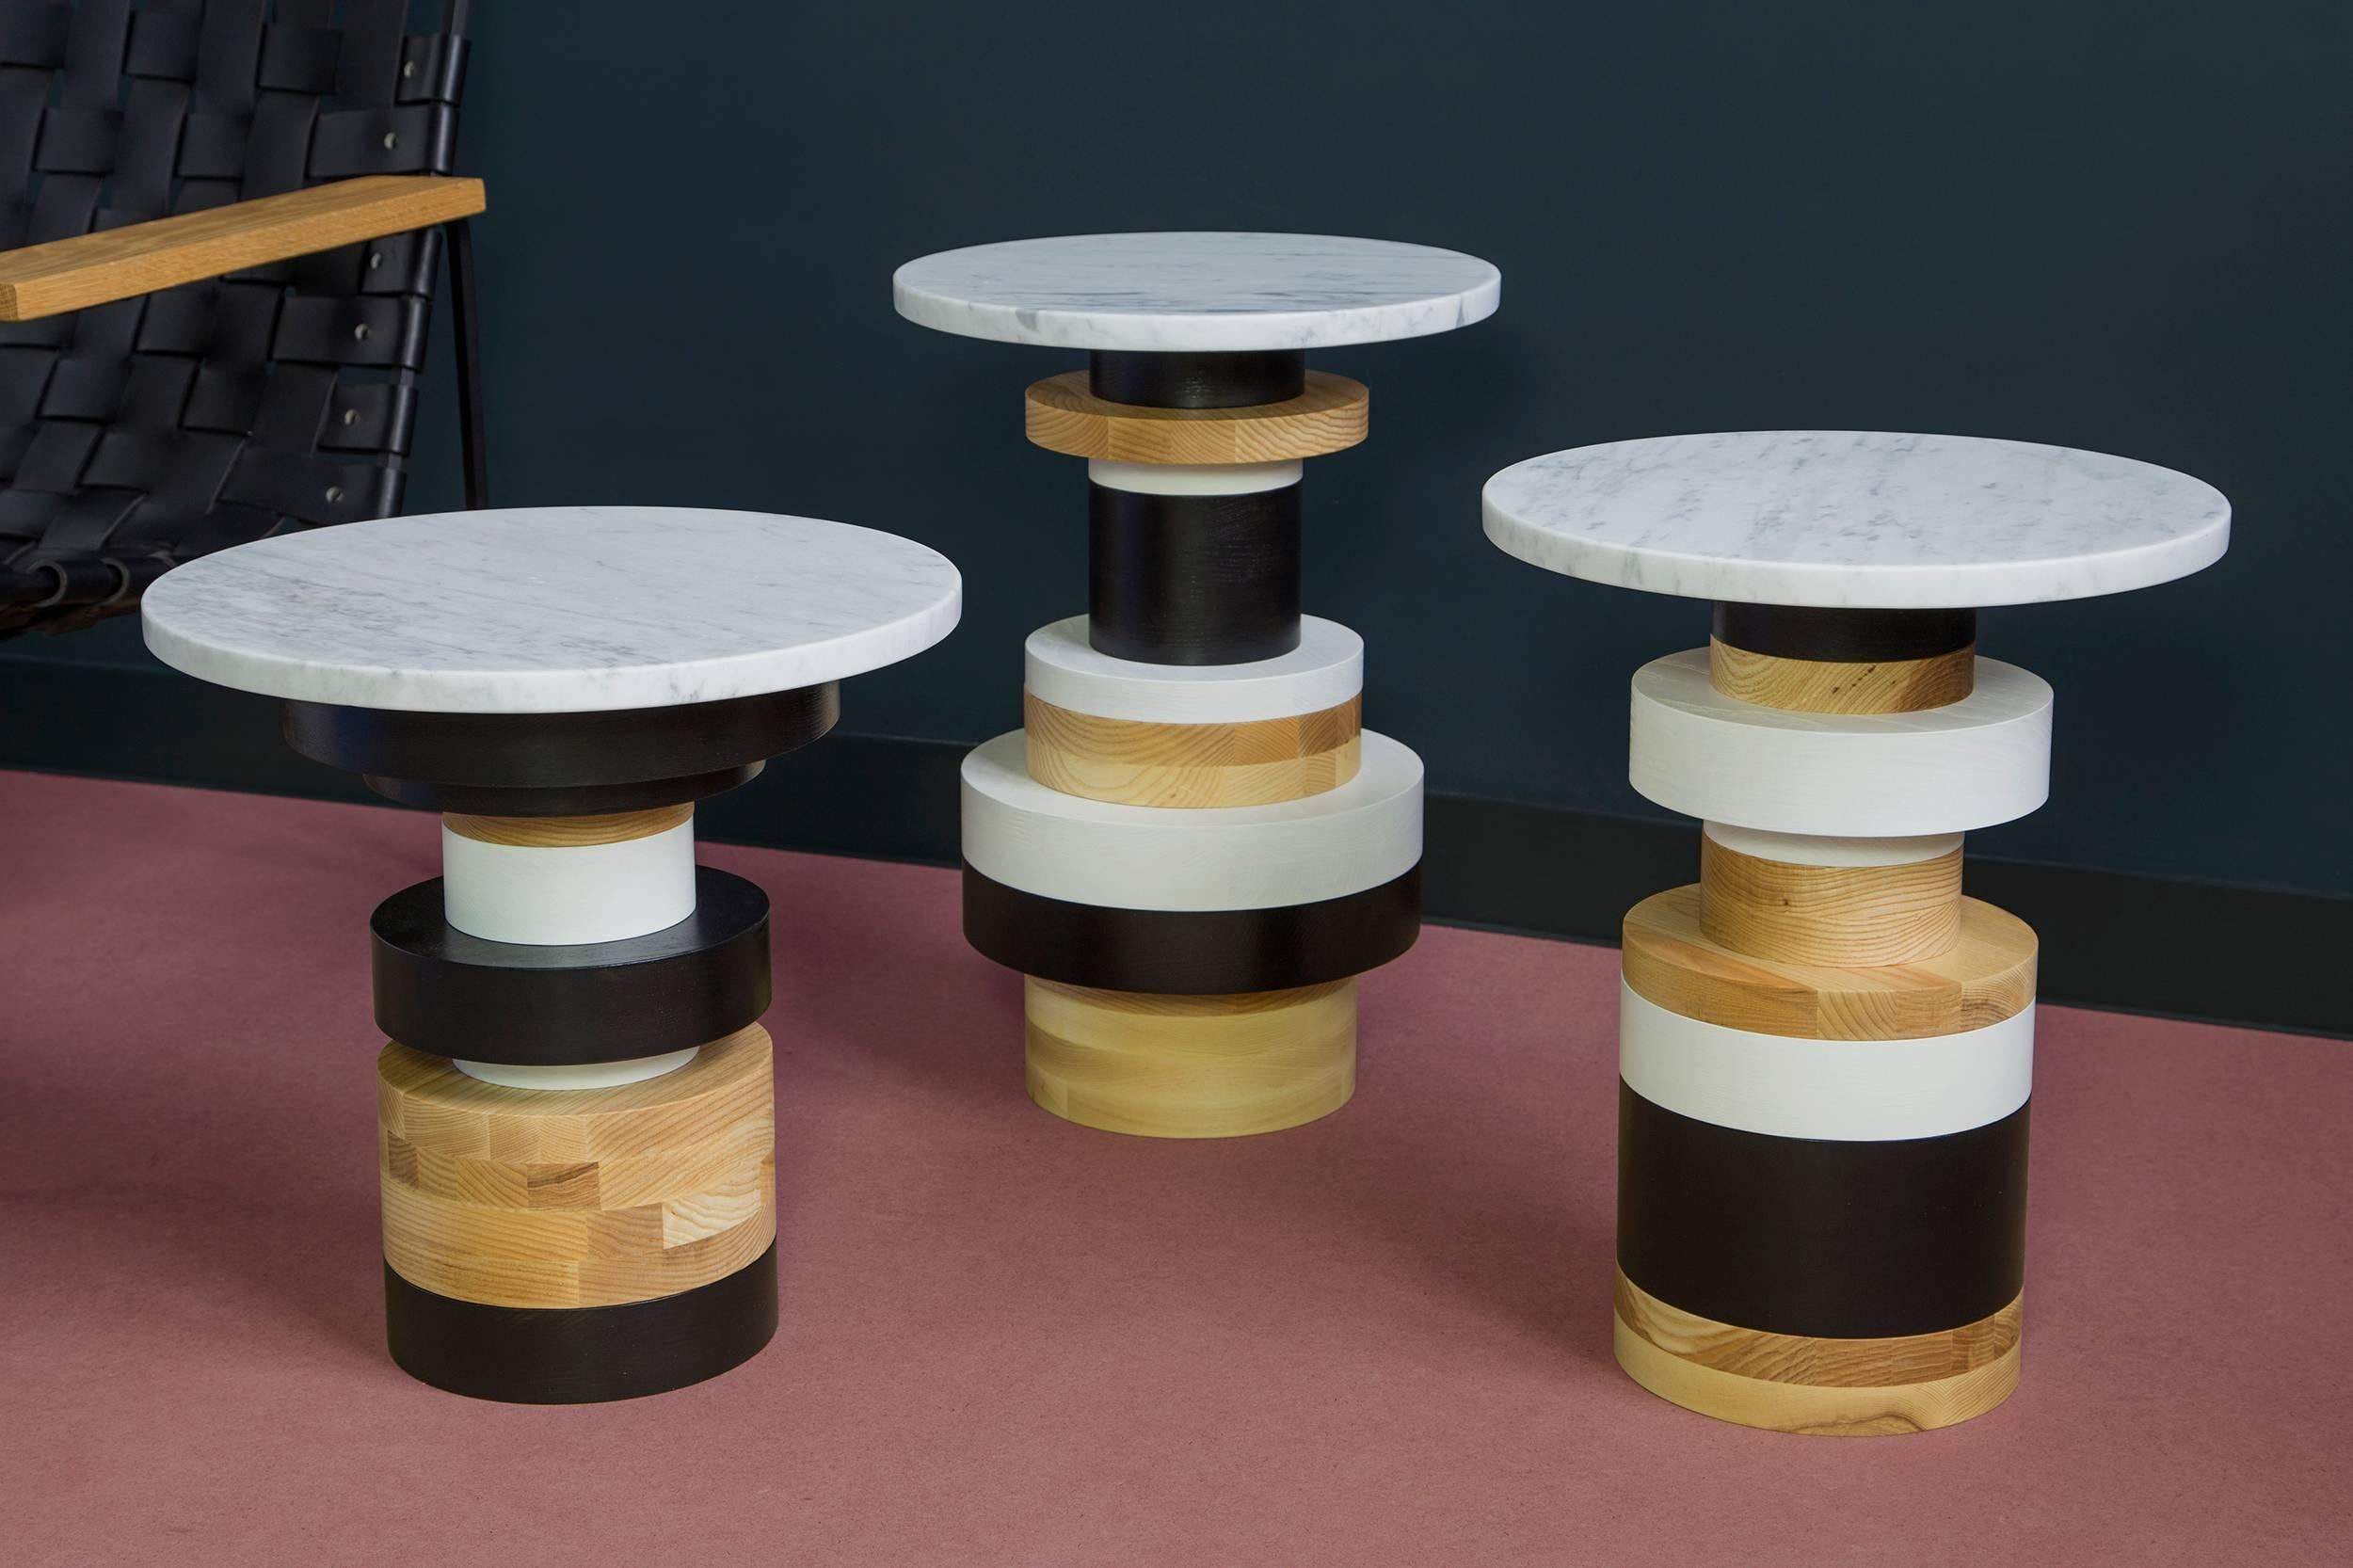 The Sottsass-inspired “Sass Tables” are simple, sculptural accents for any interior space. Made from stacked wooden bases and a honed marble top, Sass tables are perfect individually or clustered. Measures: 18 inches tall with 14 inch marble top.